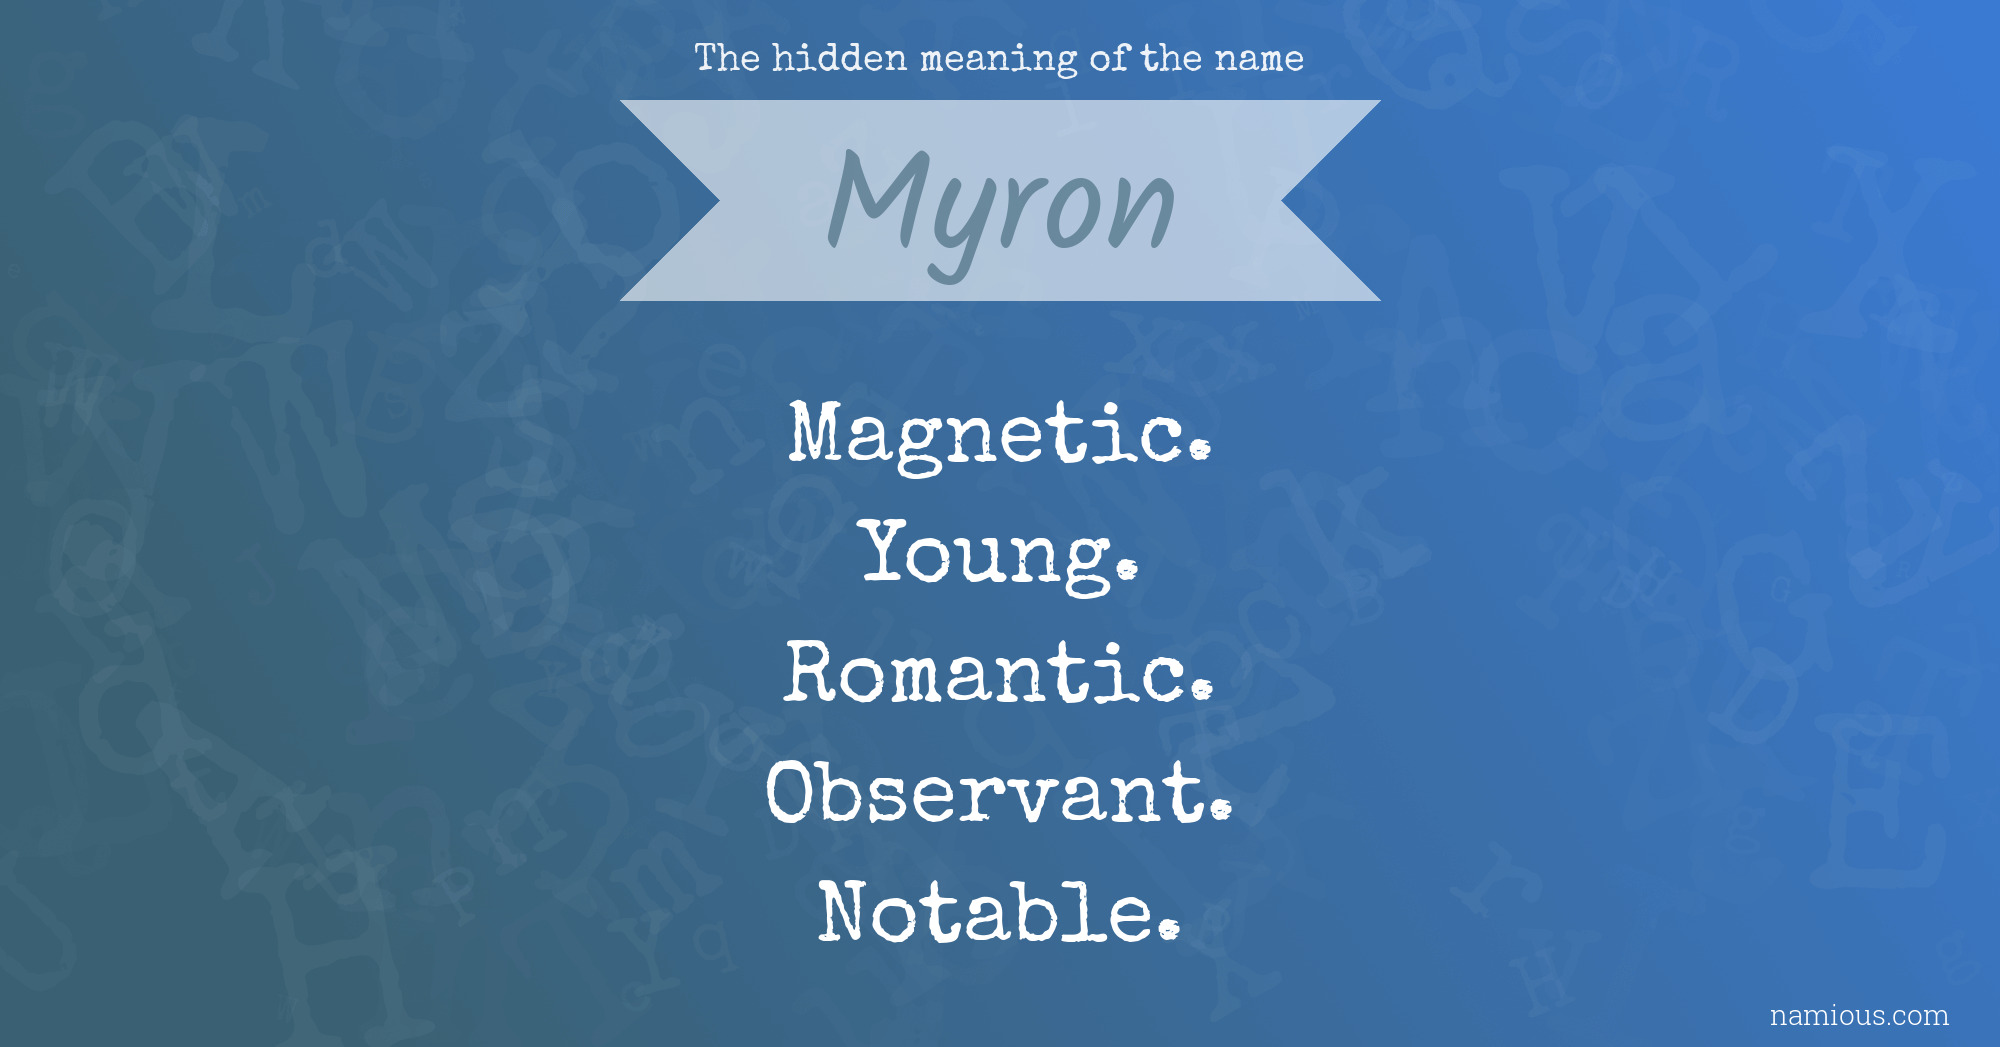 The hidden meaning of the name Myron